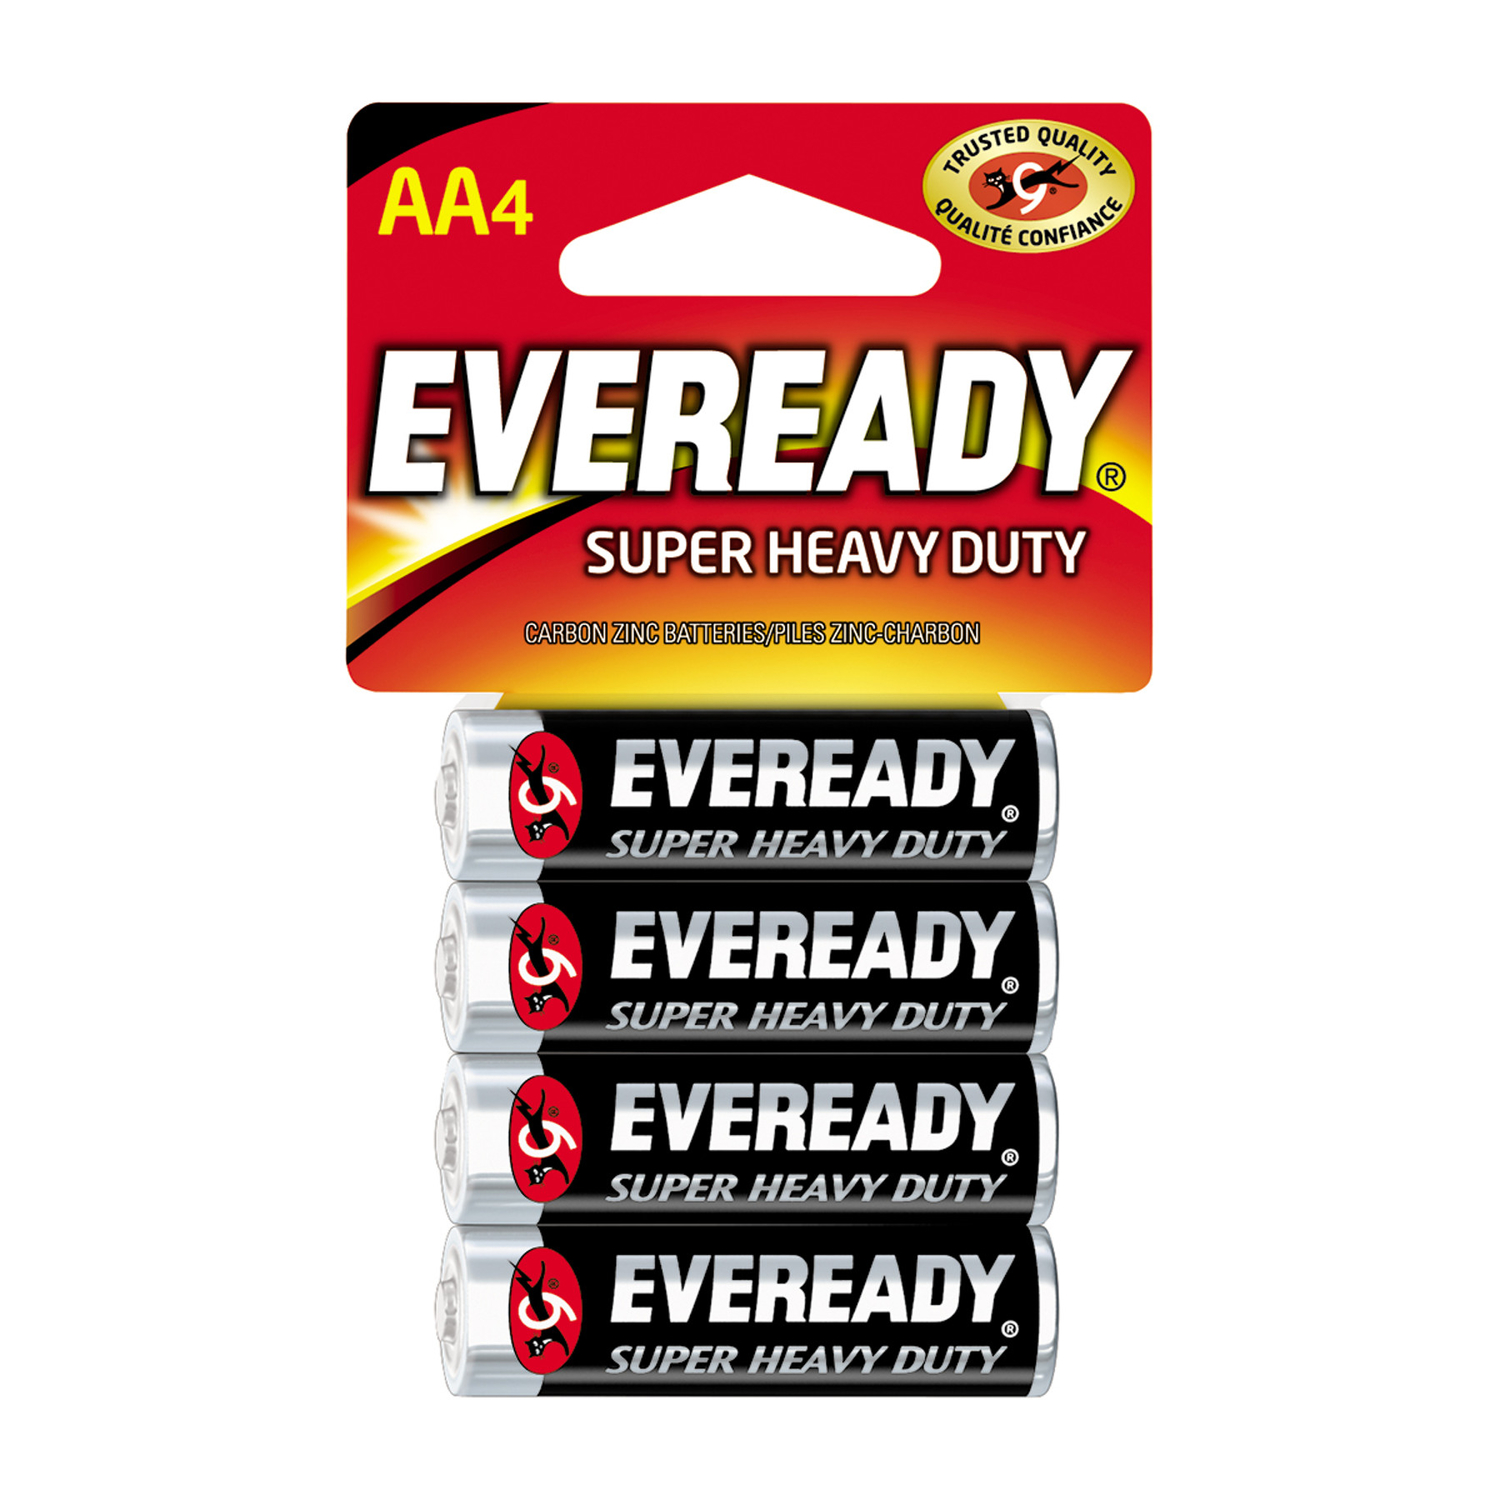 UPC 039800040008 product image for Eveready Super Heavy Duty AA Zinc Carbon Batteries 4 pk Carded | upcitemdb.com